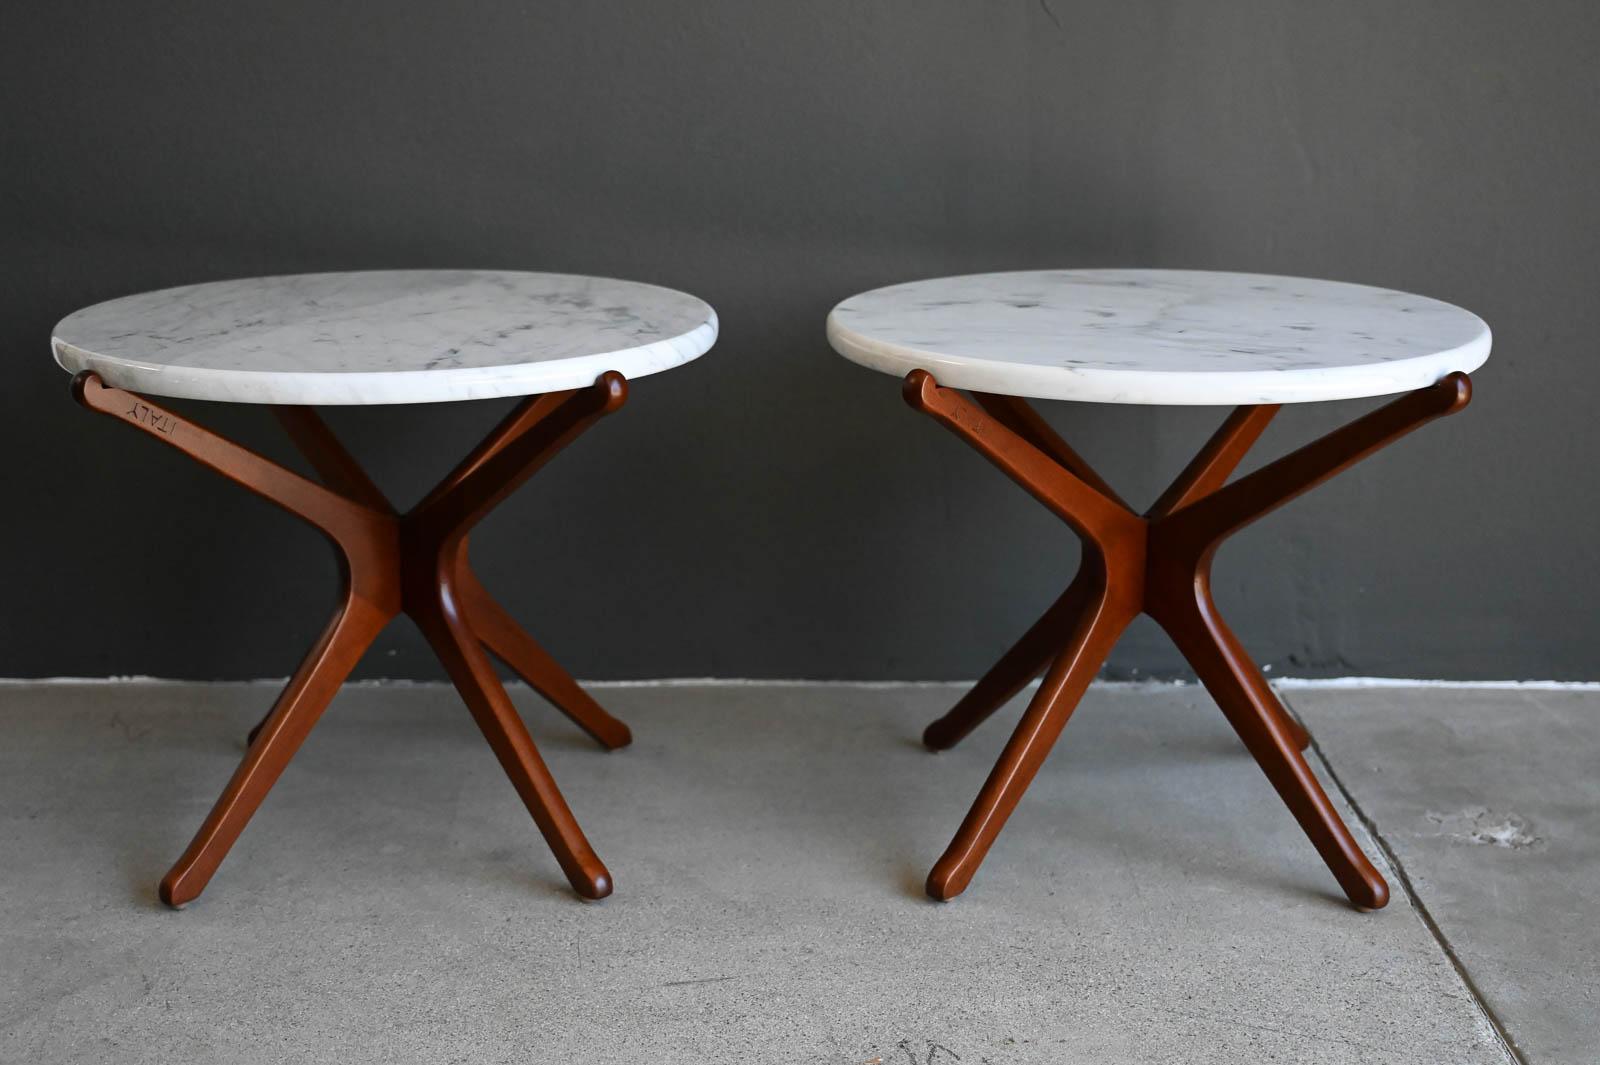 Pair of Ico Parisi Italian Walnut and Marble Side Tables, ca. 1960.  Walnut star bases float on top of the tripod star base with sculpted legs and feet.   Base has been professionally restored and marble is free of cracks and chips.  Beautiful grain